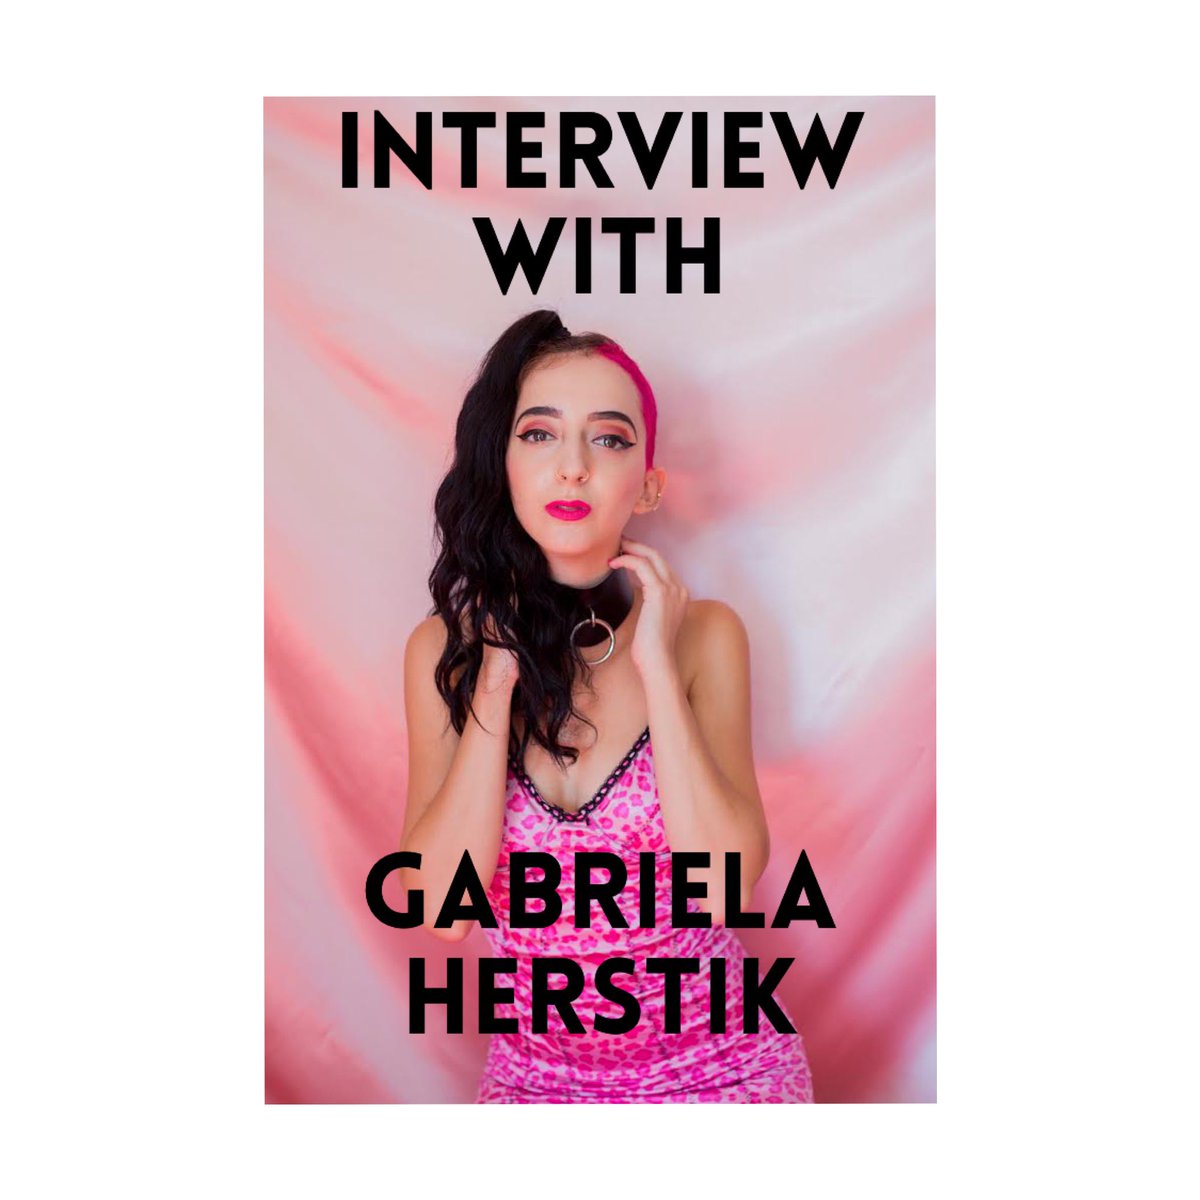 Join us Monday 10/26 for an interview with Dark Goddess @GabyHerstik Gabriela is an author, fashion alchemist, #sacredslut, and #sexwitch living in LA. She is a Devotee of the (Dark) Goddess of Love and has been a practicing witch for over 13 years

7pm EST on #PERISCOPE